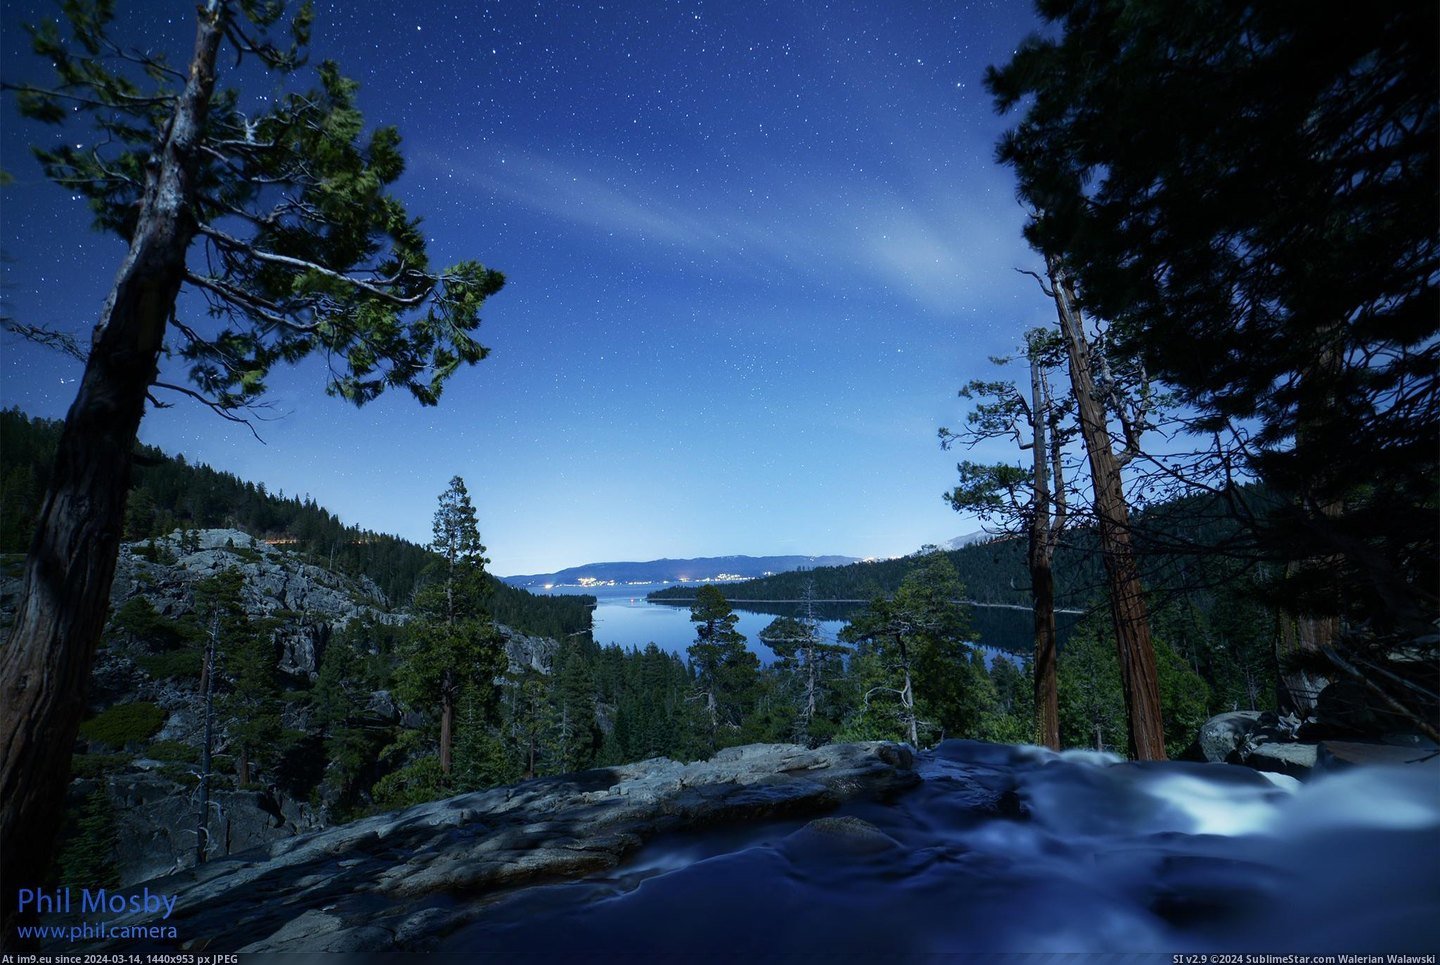 #Night #Lake #Falls #Tahoe #Emerald #2048x1367 #Phil #Bay #Stars #Eagle [Earthporn] Stars over Eagle Falls - Emerald Bay, Lake Tahoe, the night before last [oc by Phil Mosby][2048x1367] Pic. (Bild von album My r/EARTHPORN favs))